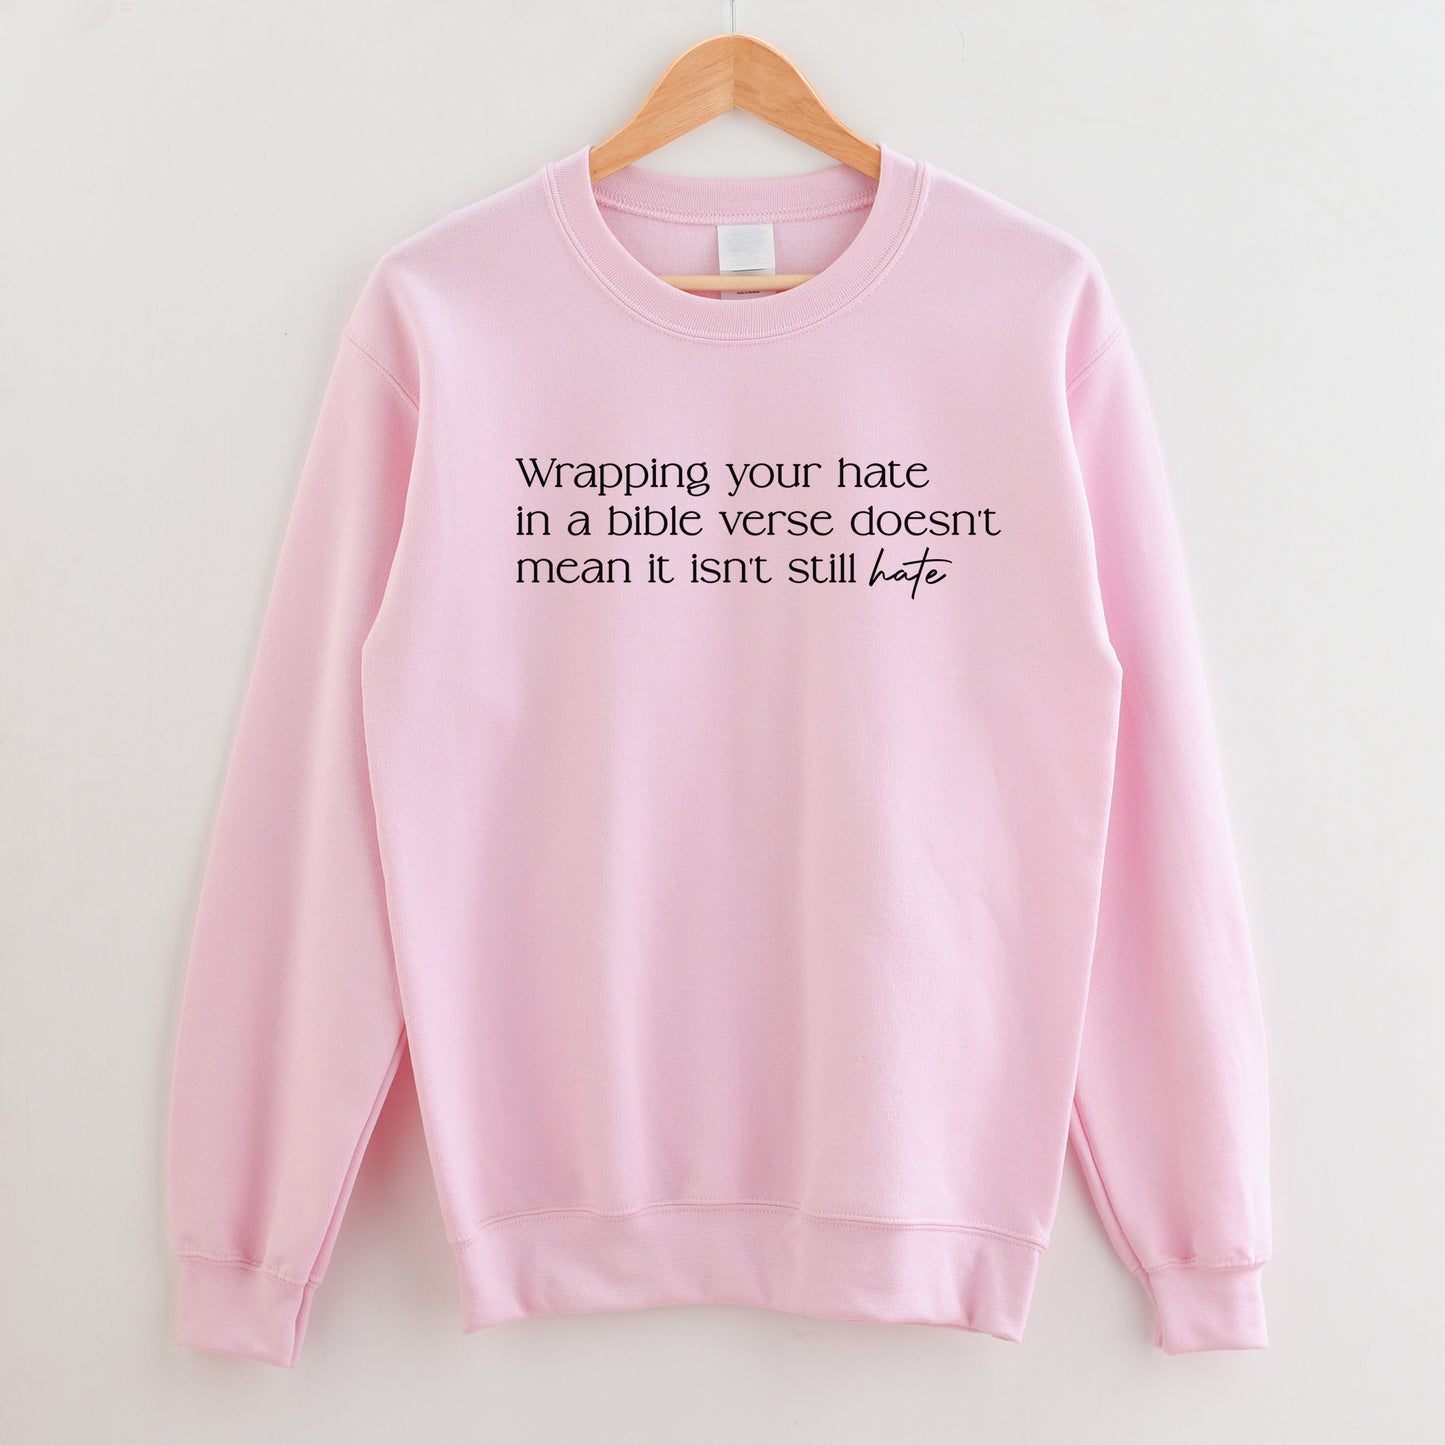 Wrapping Your Hate in a Bible Verse Doesn't Mean it isn't Still Hate Sweatshirt